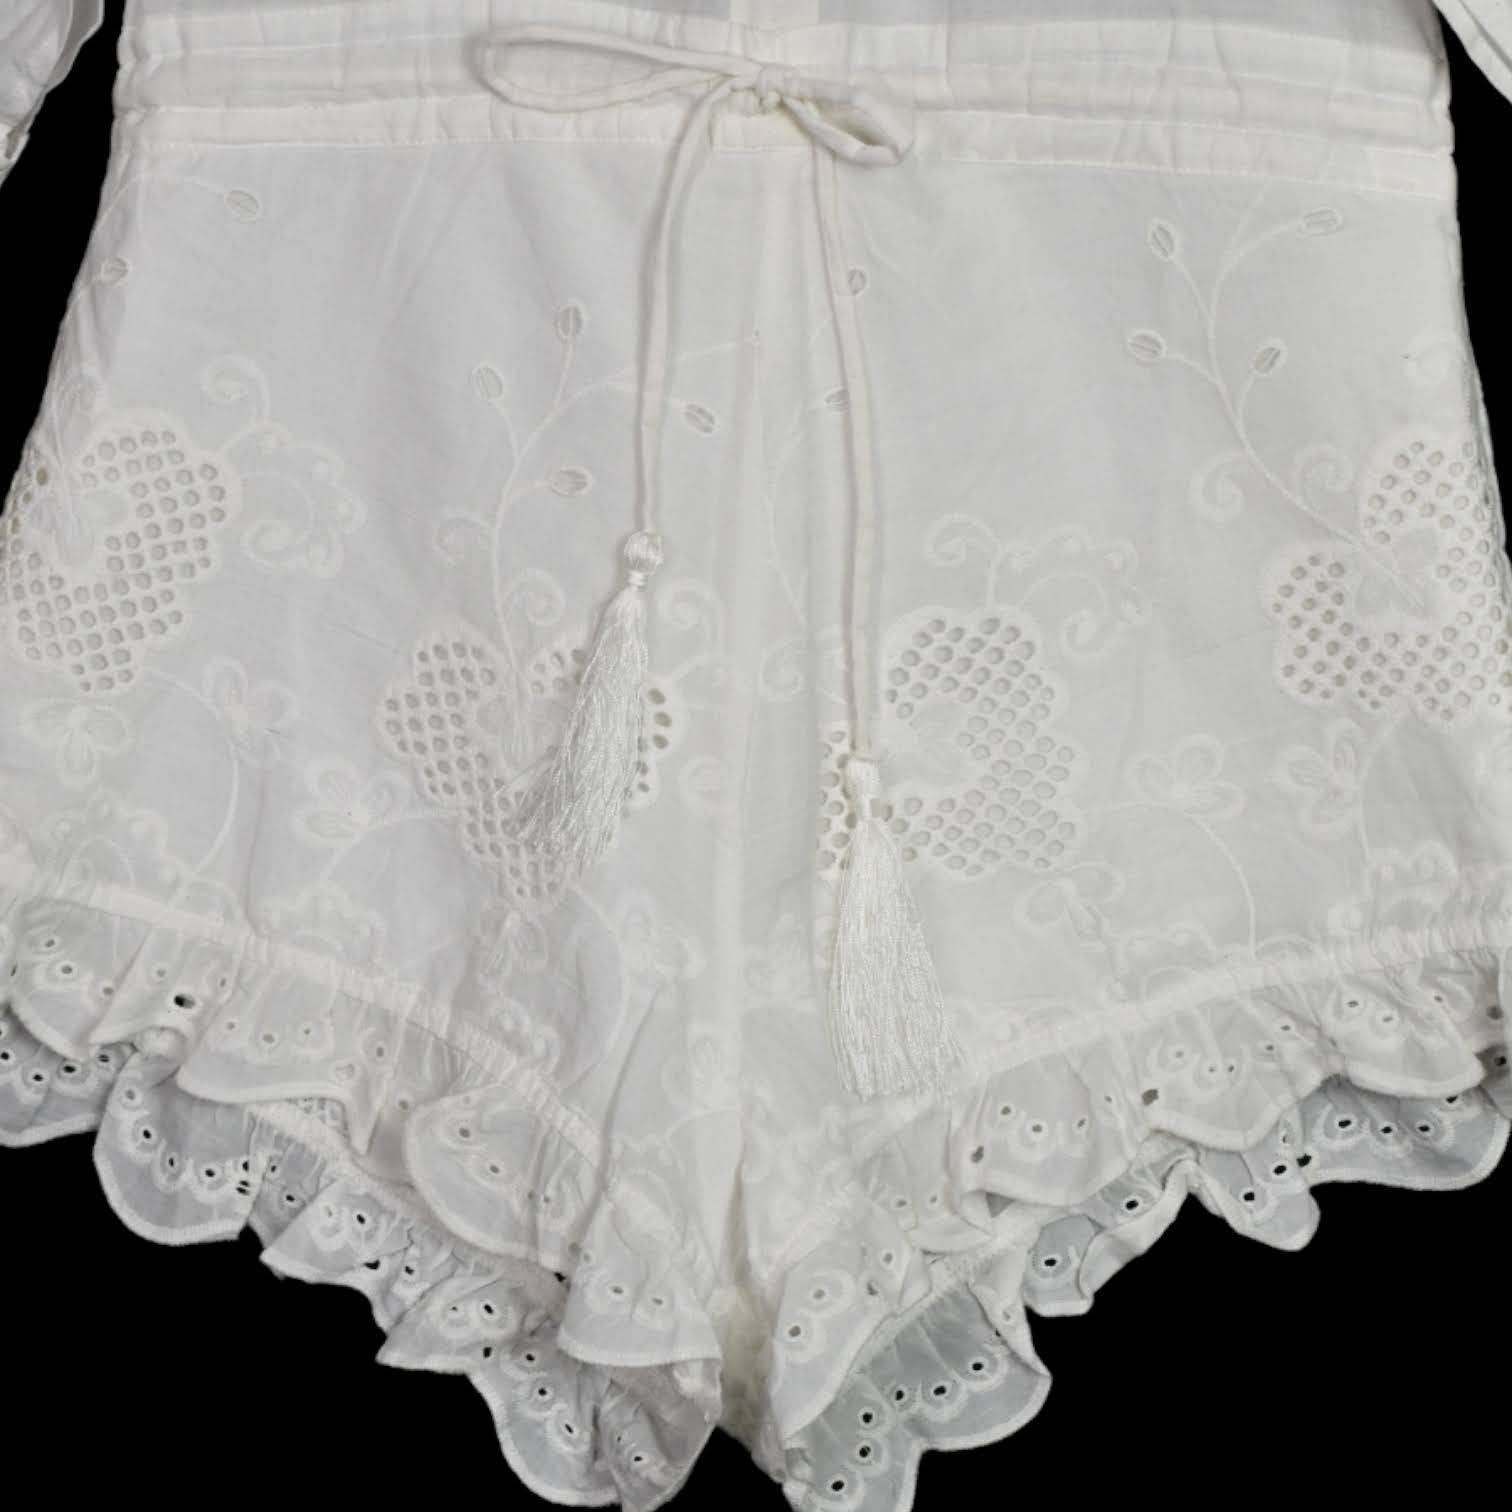 Spell Casablanca Romper White Playsuit Embroidered Drawstring Shorts Size XS